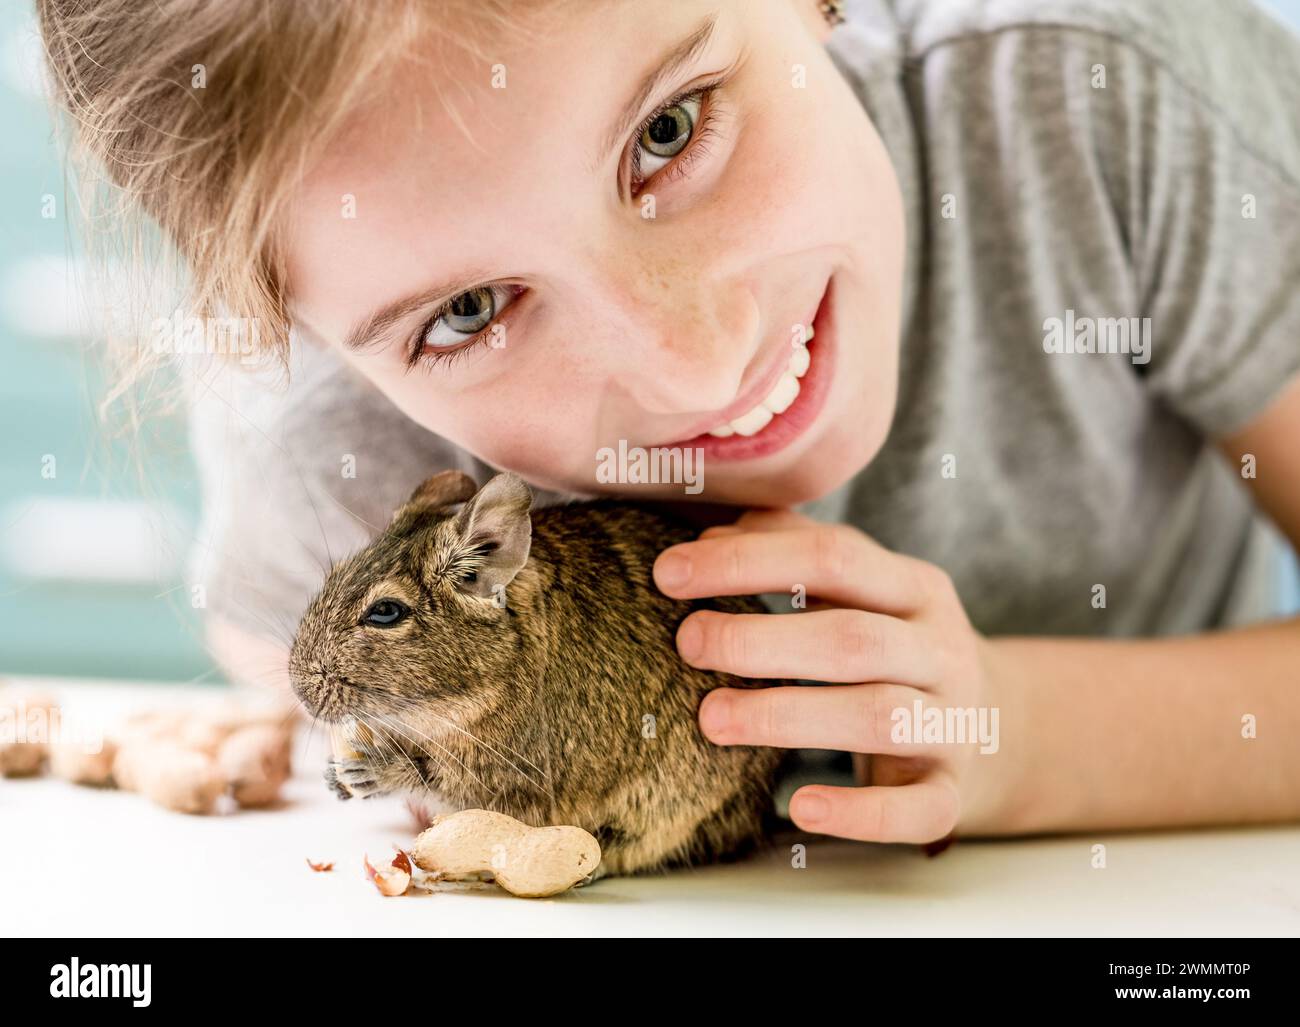 Portrait of young girl with degu squirrel and nuts, close-up. Stock Photo